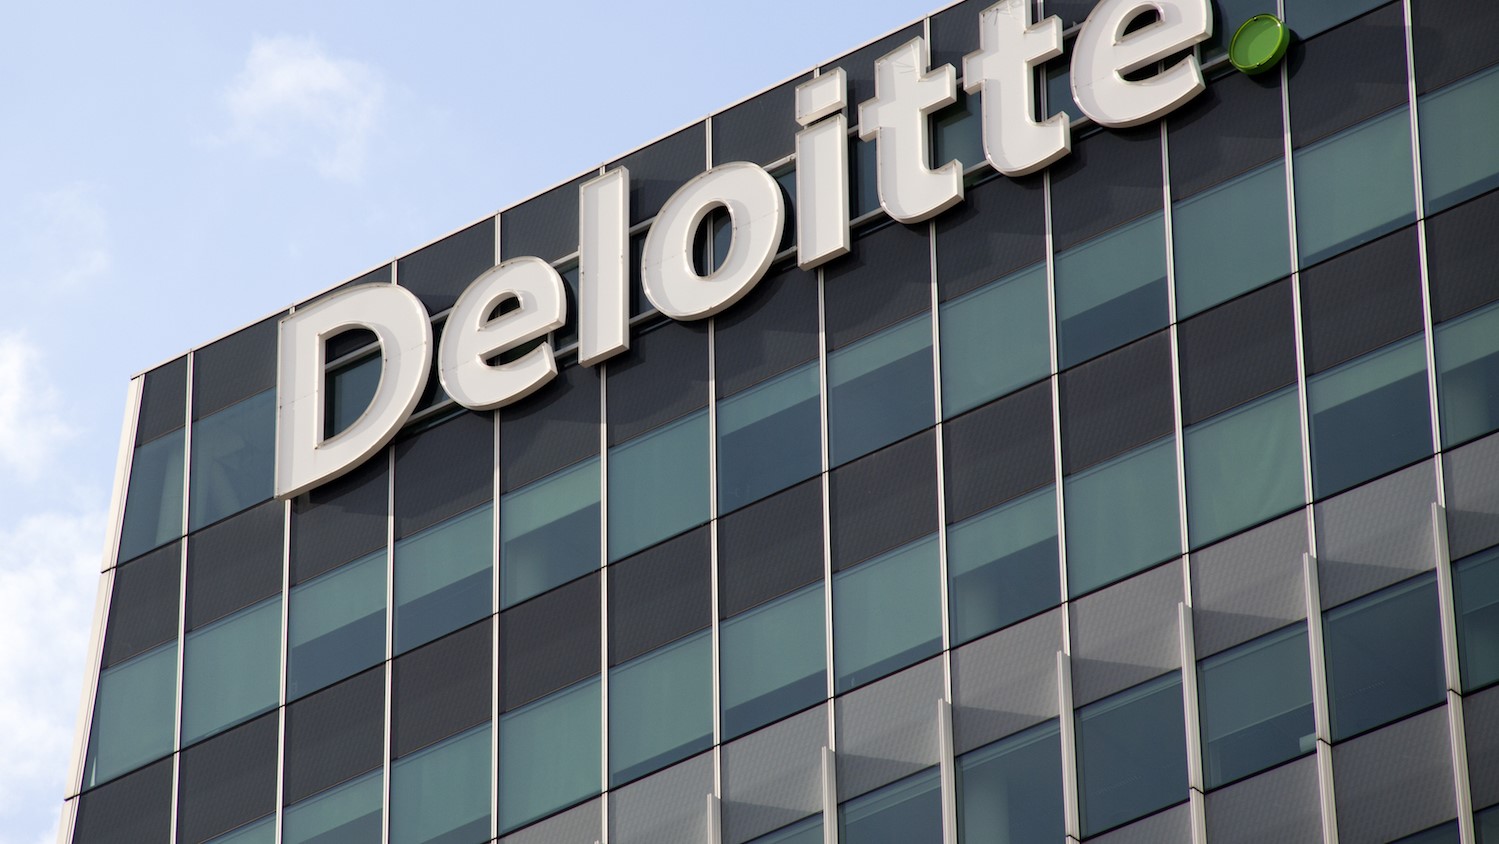 deloitte advised, managed and covered up il&fs financial irregularities: whistleblower | newsclick